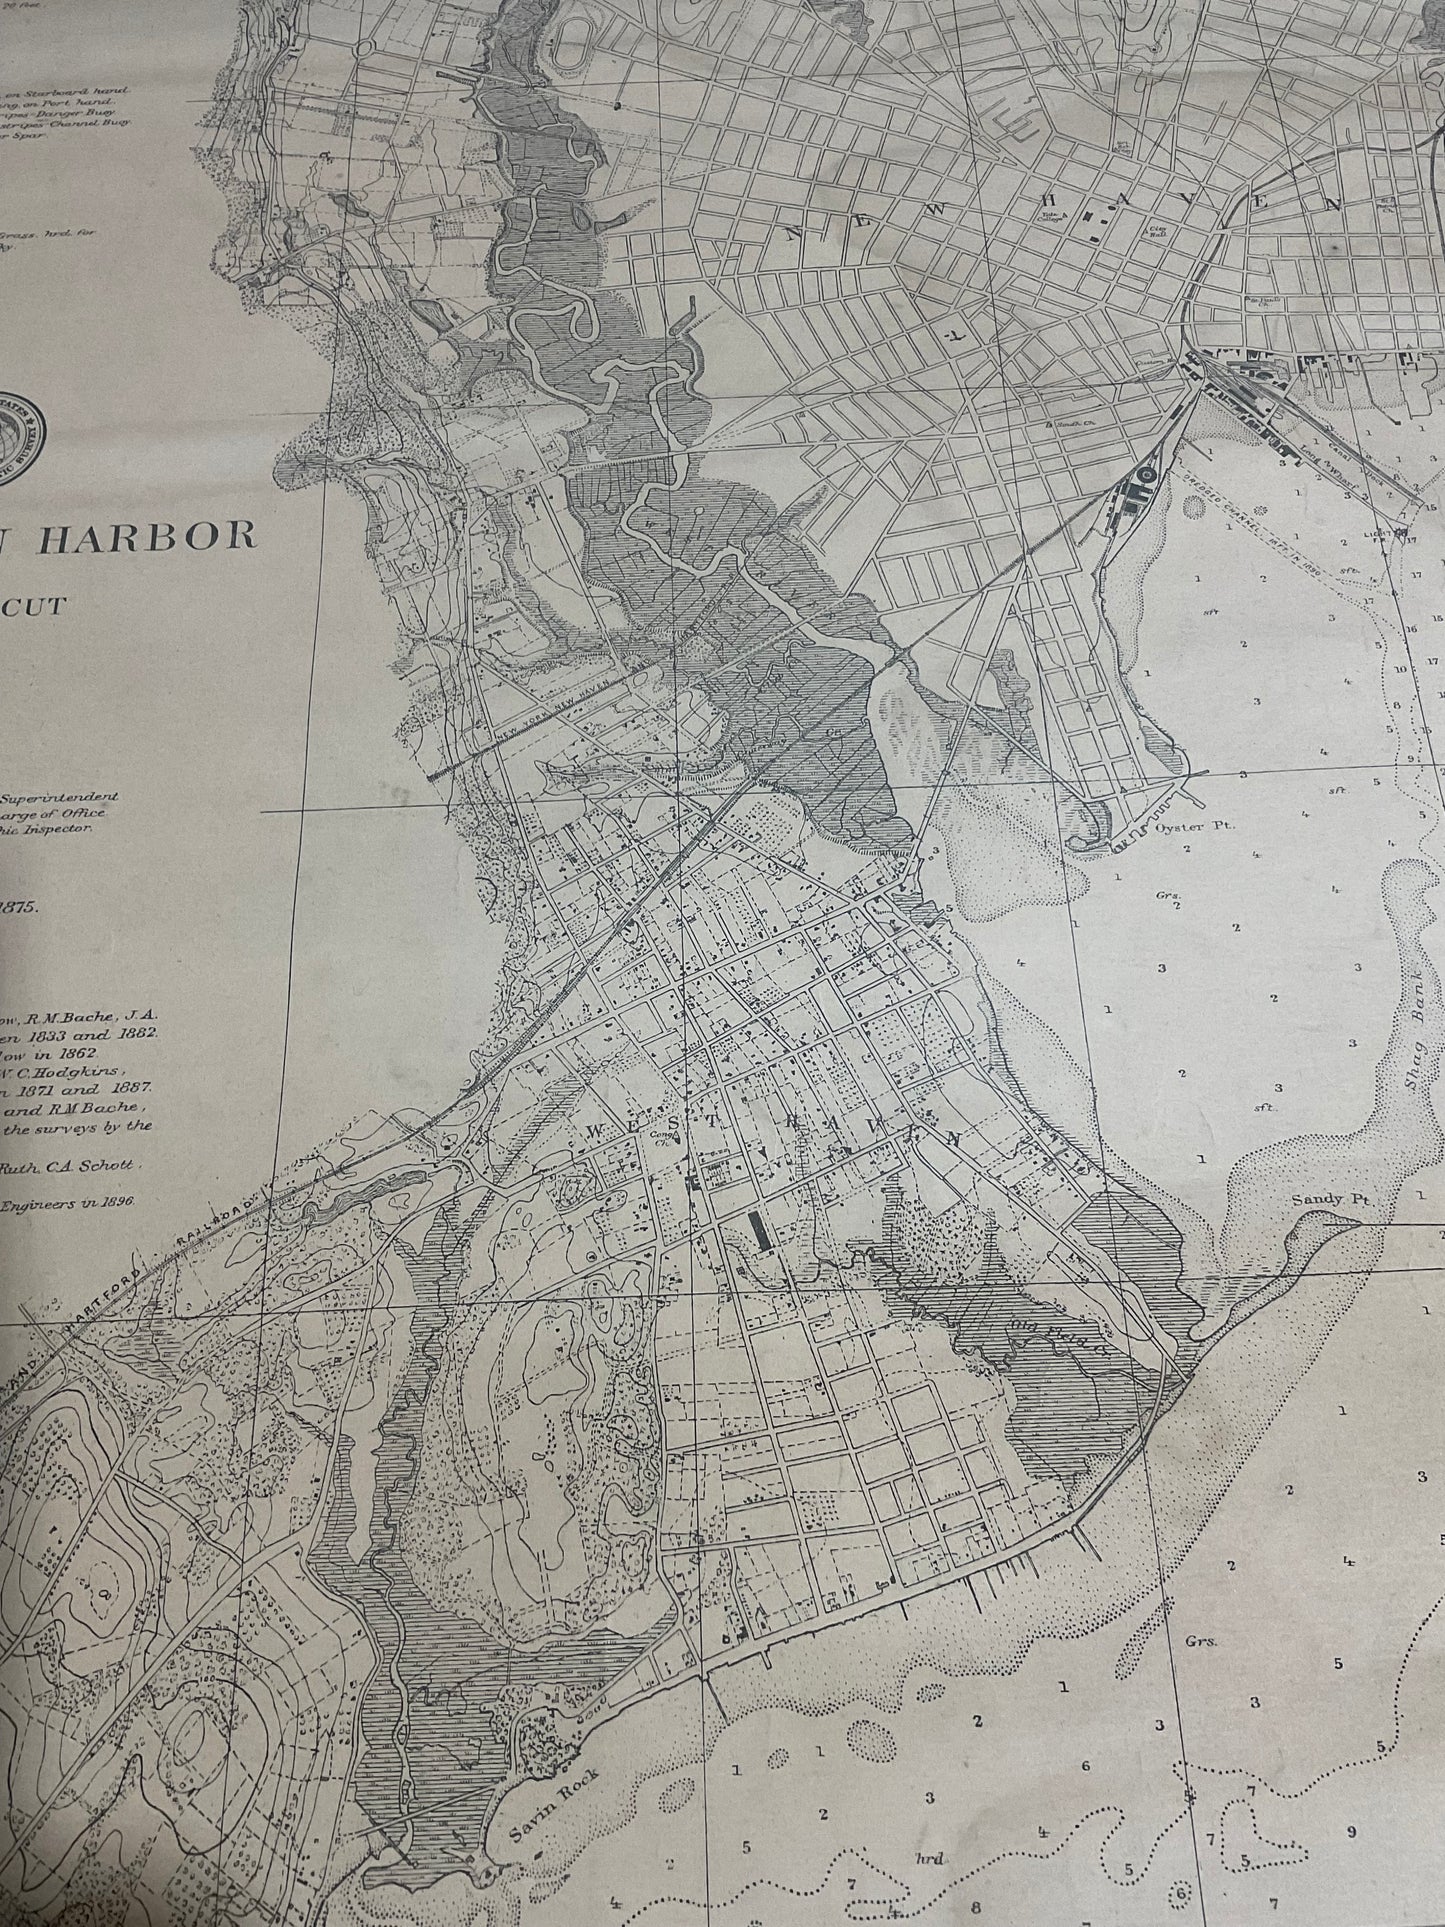 1896 Chart of the New Haven Harbor